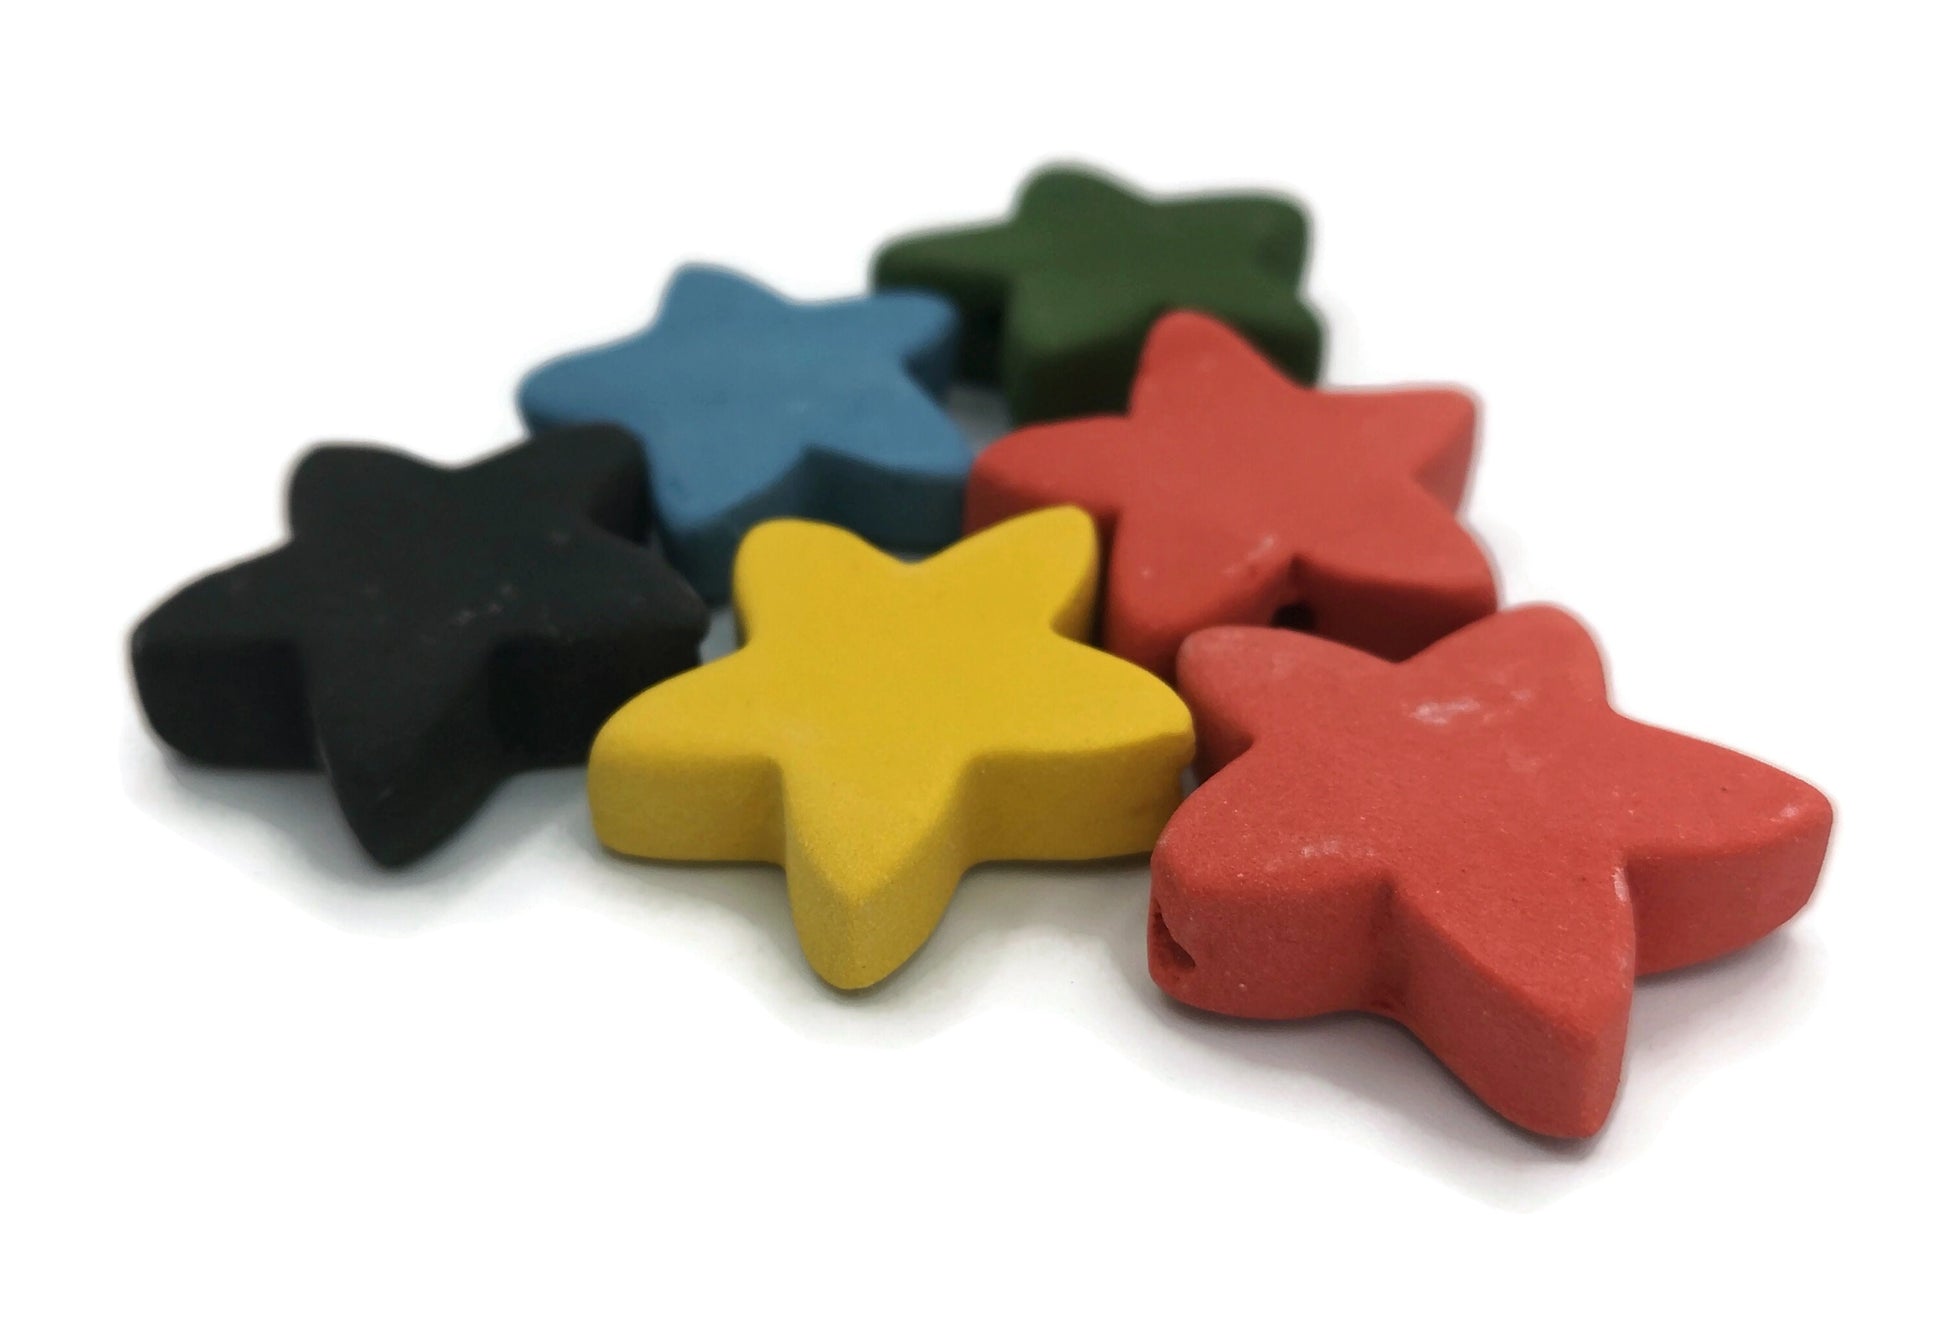 6Pc 35mm Extra Large Handmade Ceramic Star Beads For Jewelry making, Macrame Beads Large Hole 2mm,Assorted Matte Colorful Clay Beads - Ceramica Ana Rafael